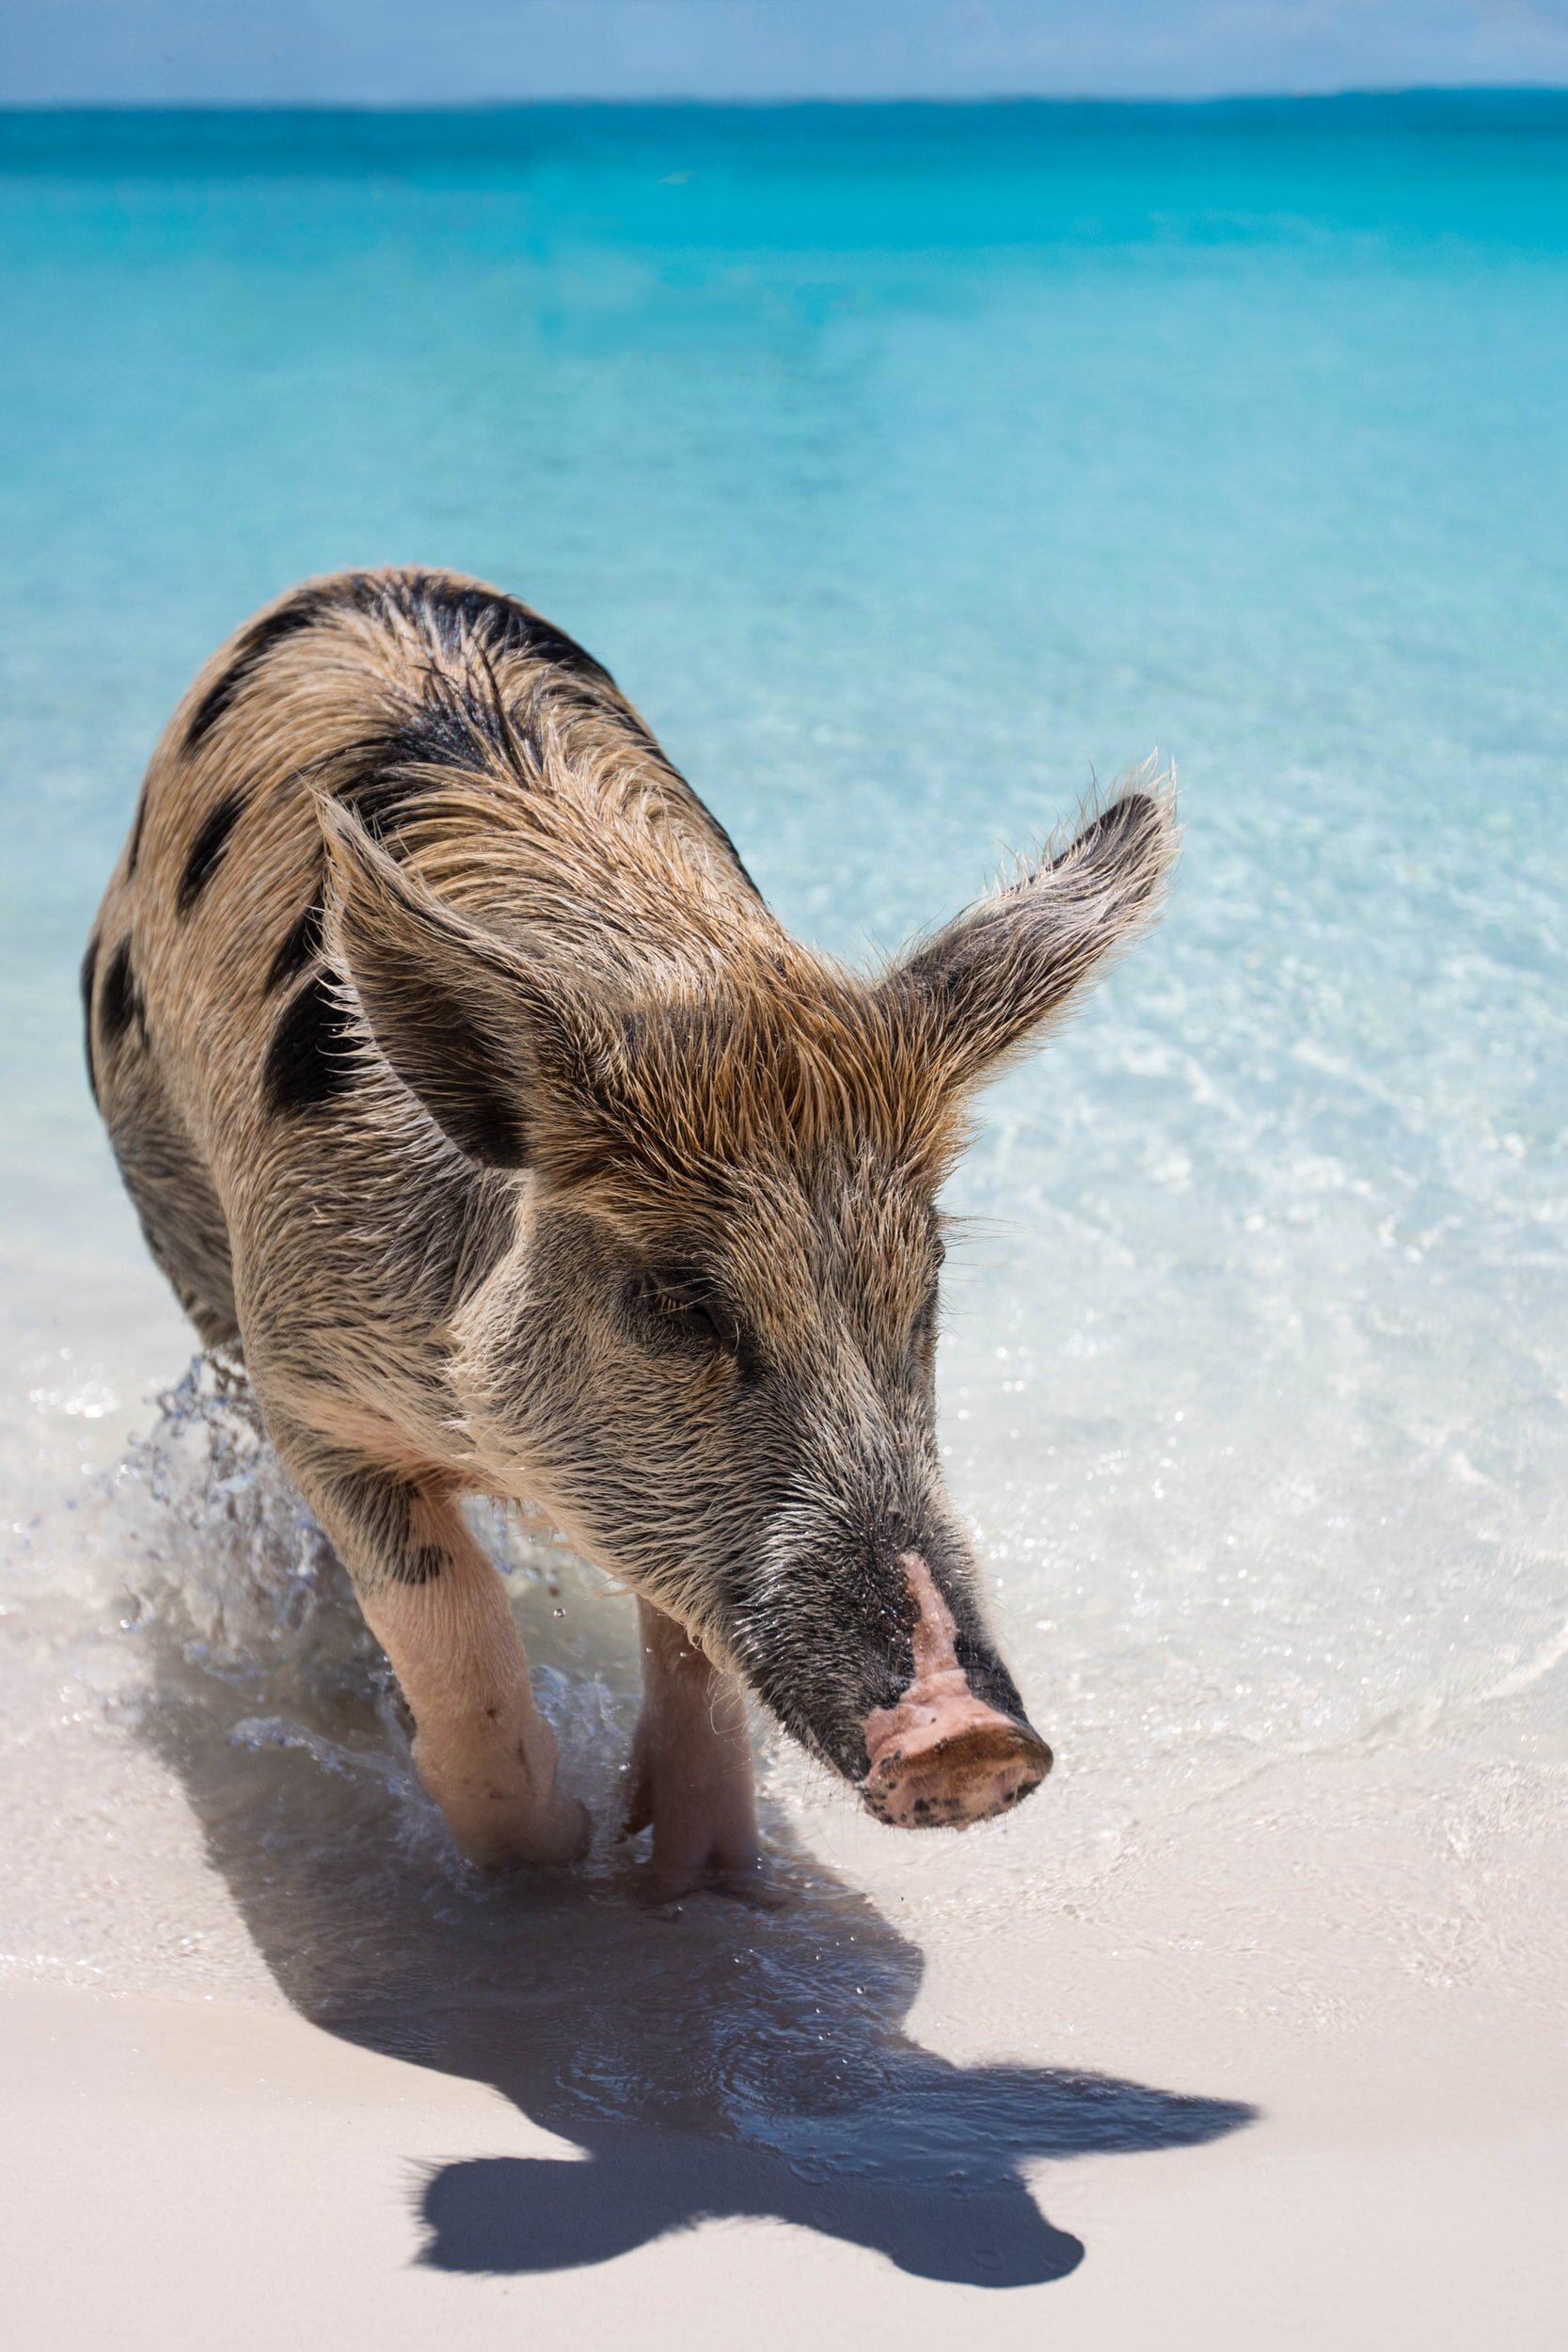 A pig in shallow water at Pig Beach in the Bahamas. The pig is wet and the sea is clear 